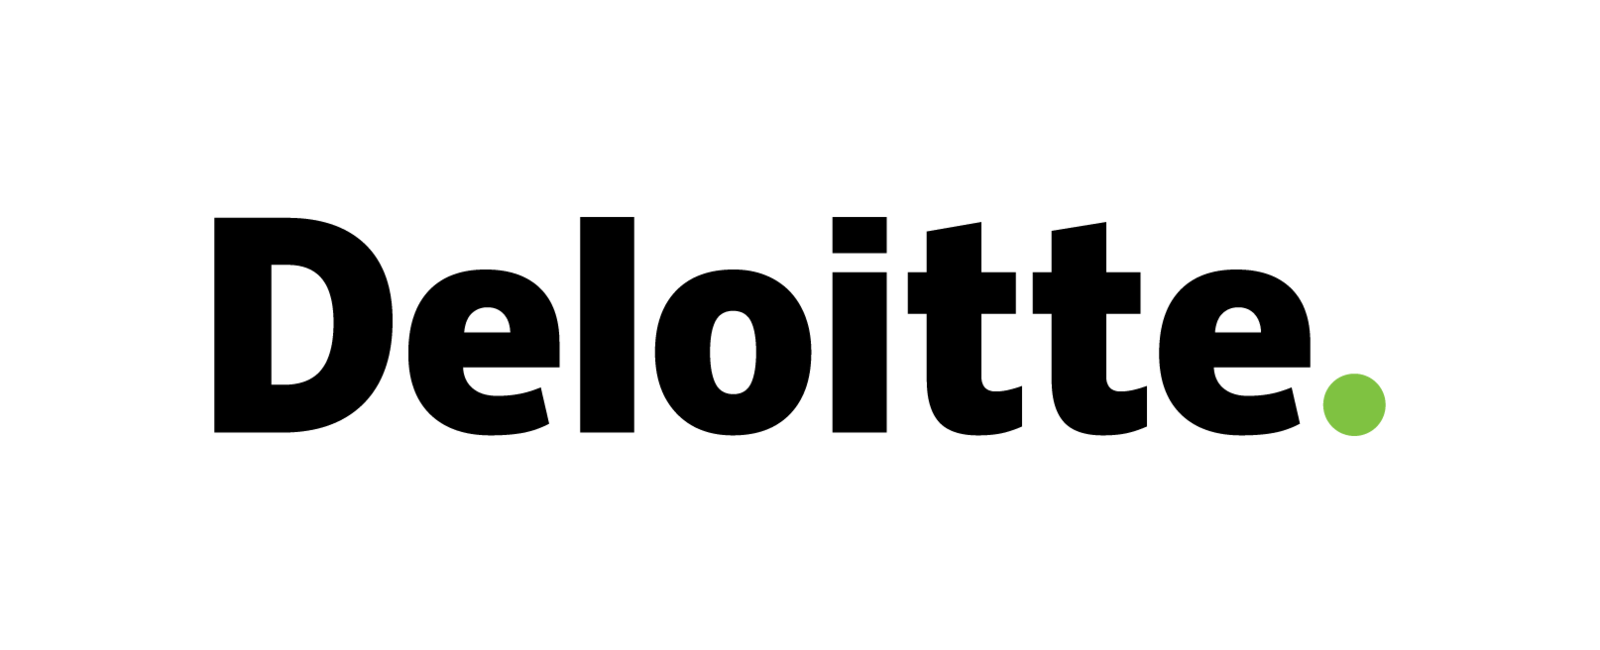 Deloitte Customer Experience quotes 